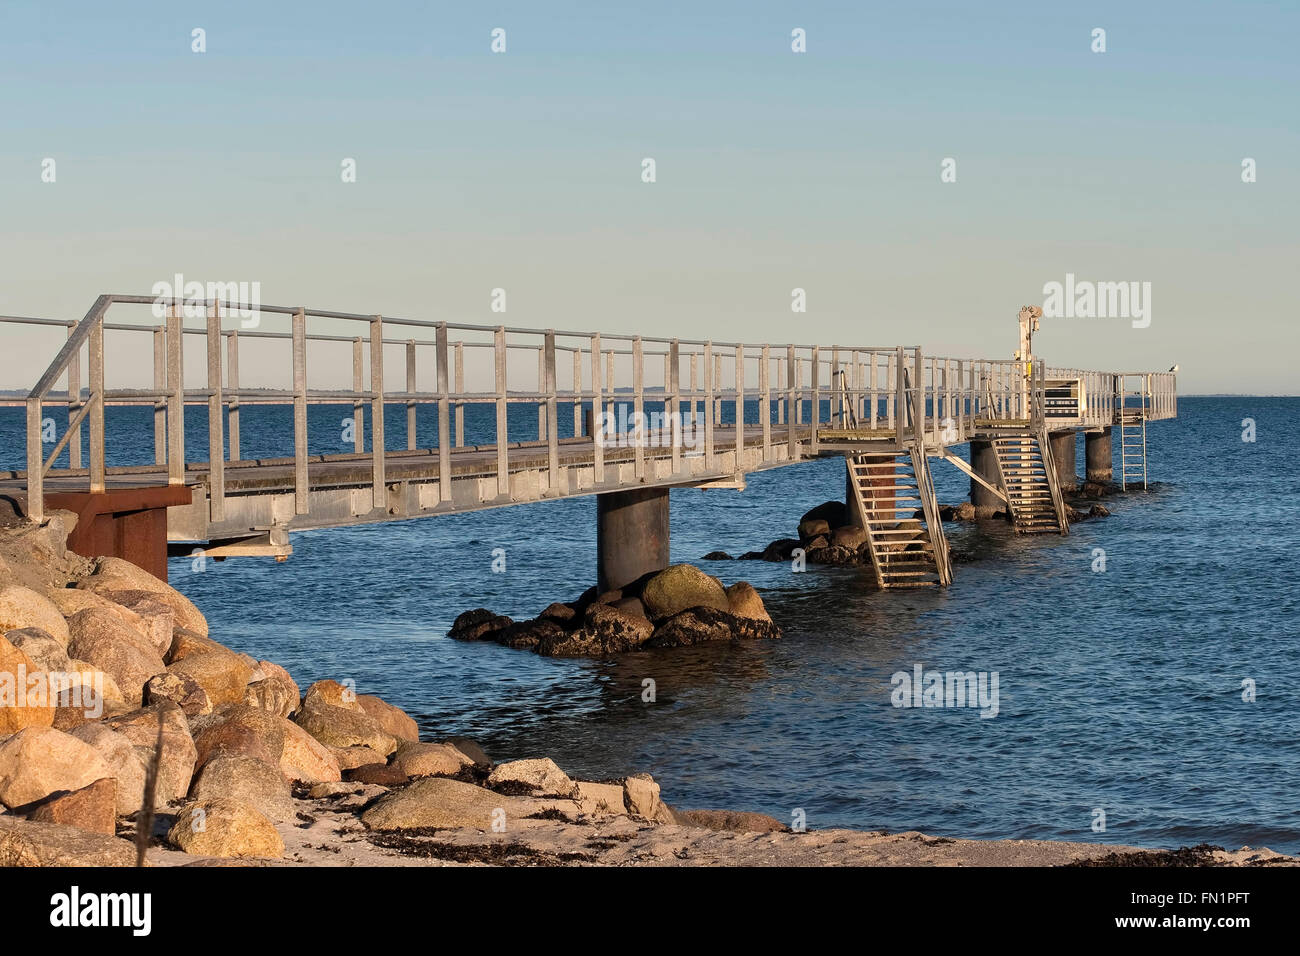 Bathing jetty at low tide near the small town Hou, Denmark Stock Photo